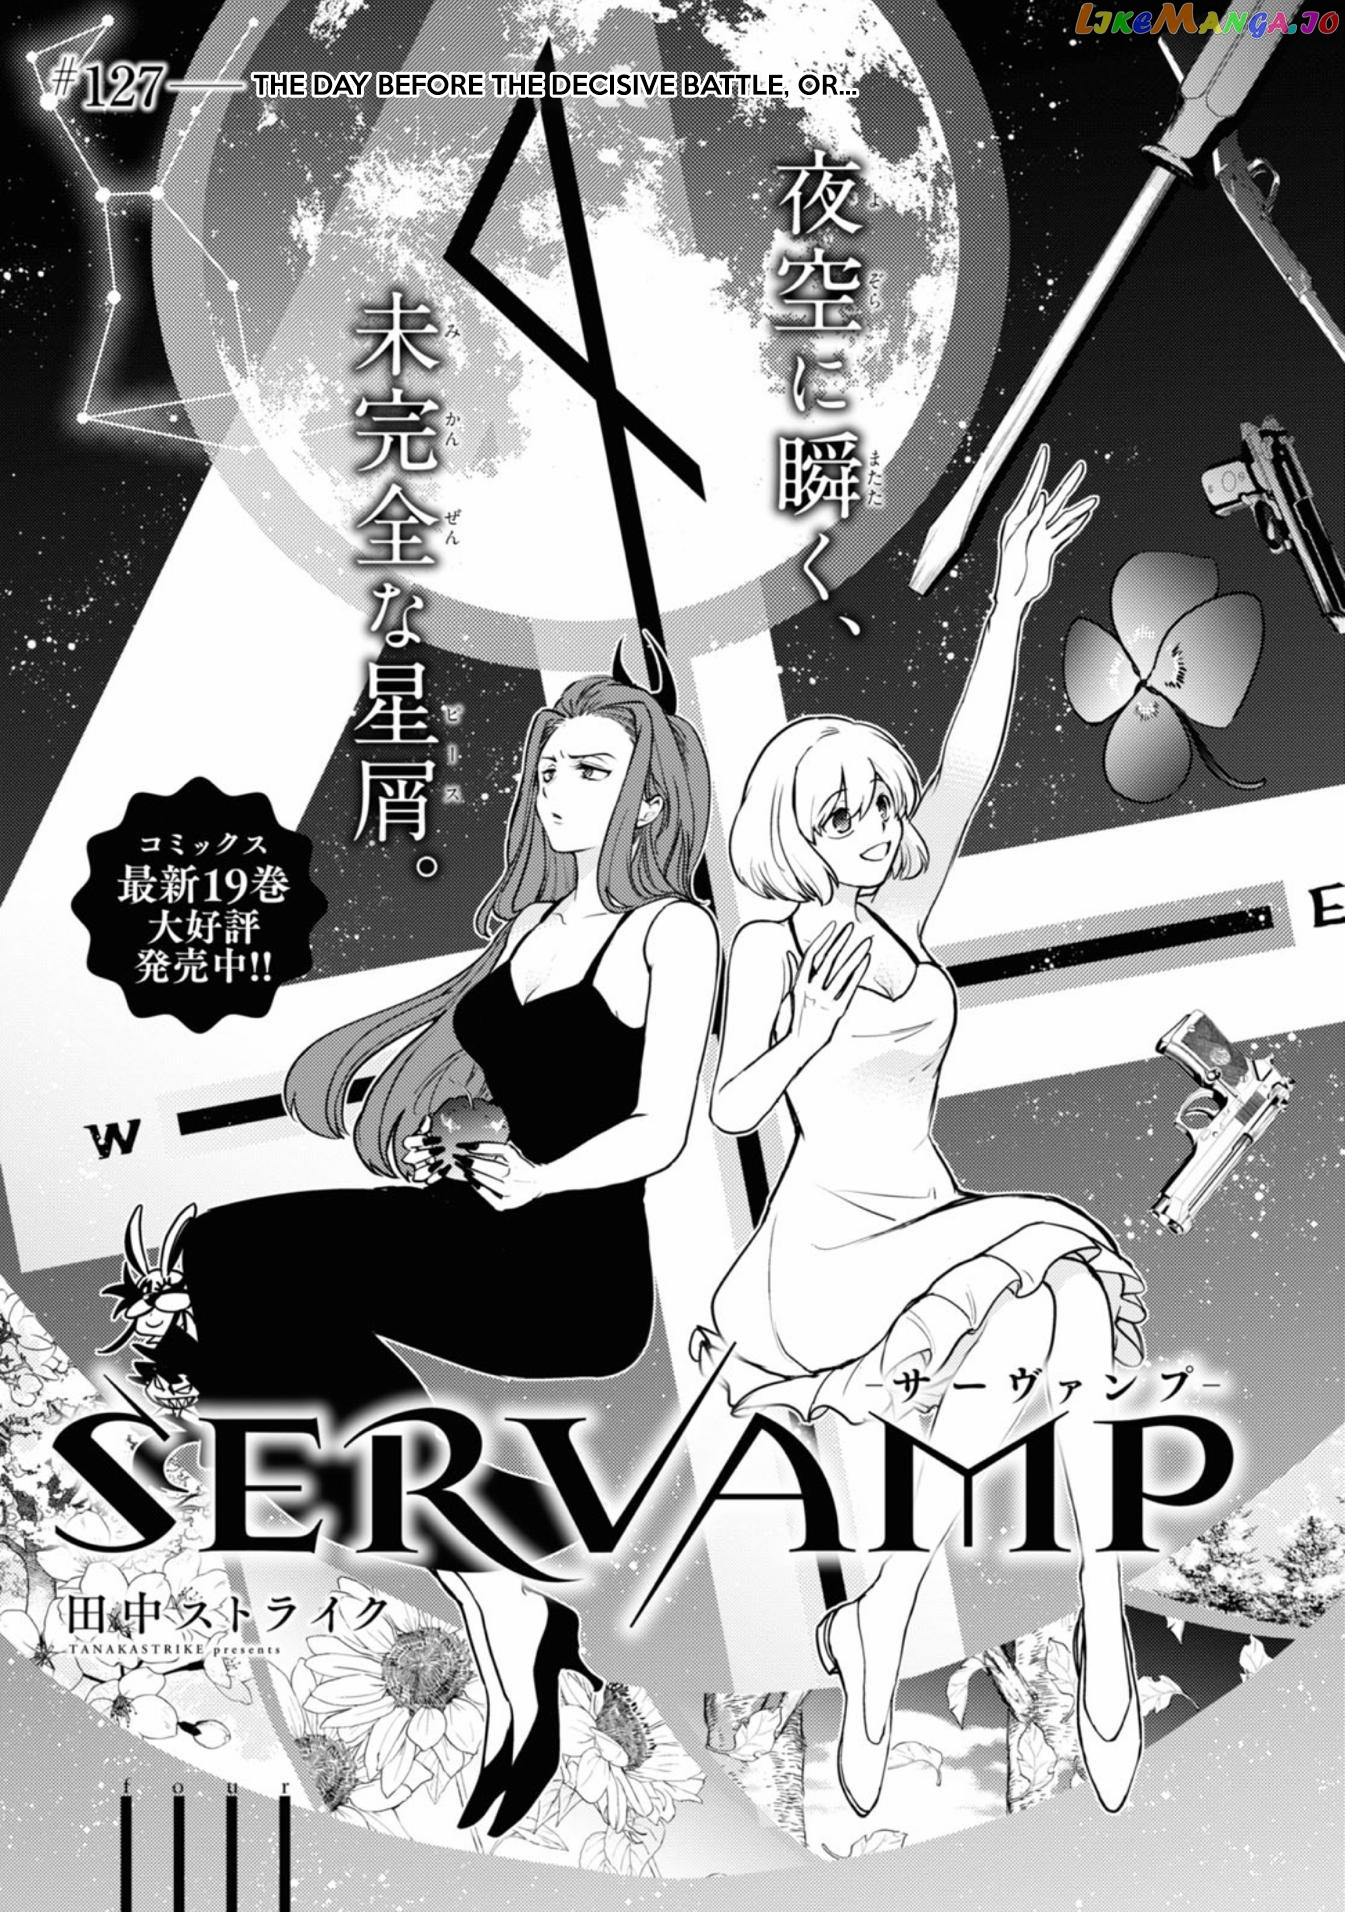 Servamp chapter 127 - page 1